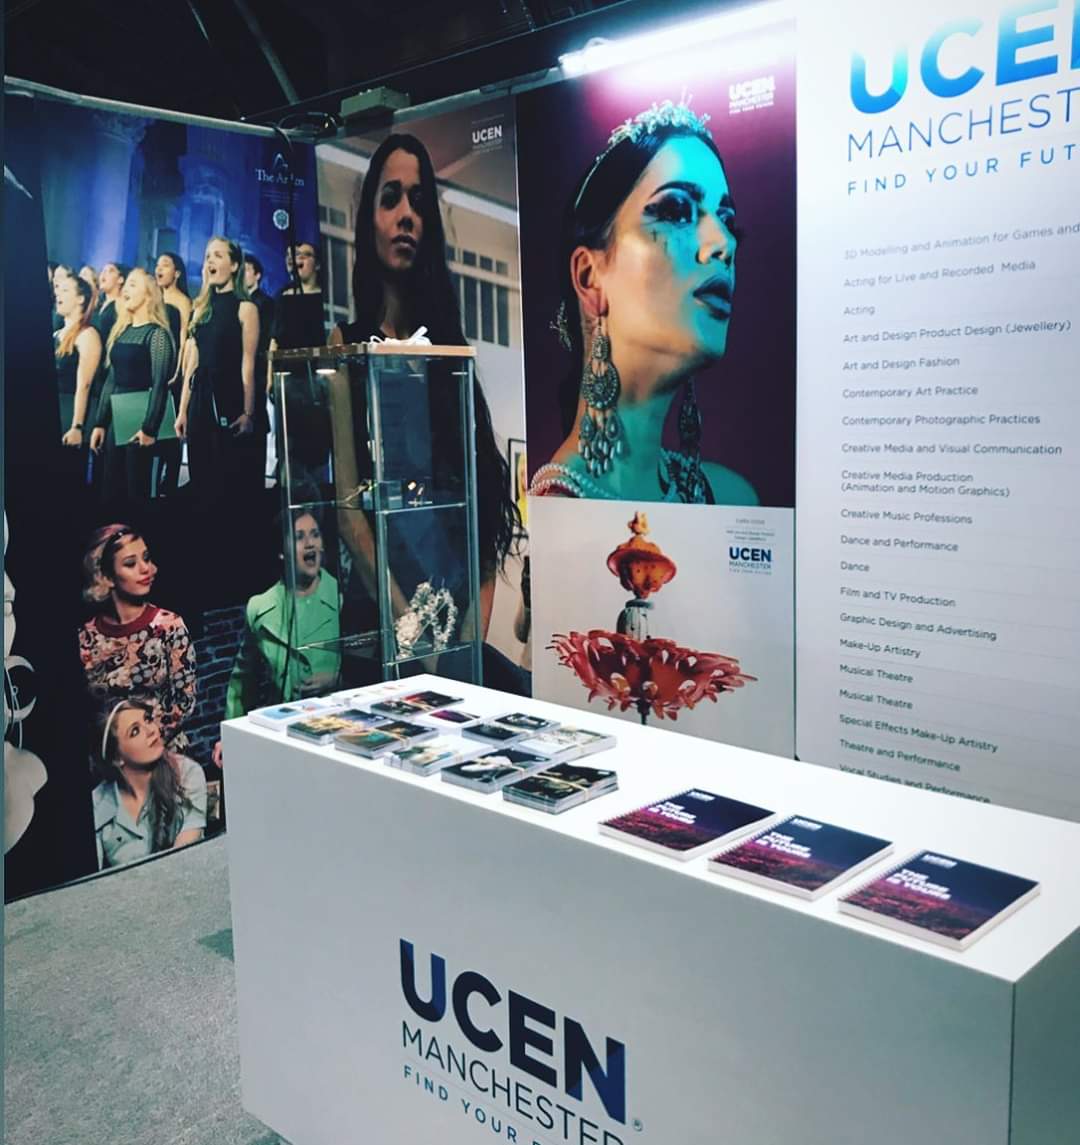 Ready to #createmanchester? Come say hi to our creative team at stand 79, tomorrow and Wednesday @mcr_central for @ucas_online Create Your Future #manchester #exhibition. #futurecreators #dm19 #design #studentlife #student #wearemcr